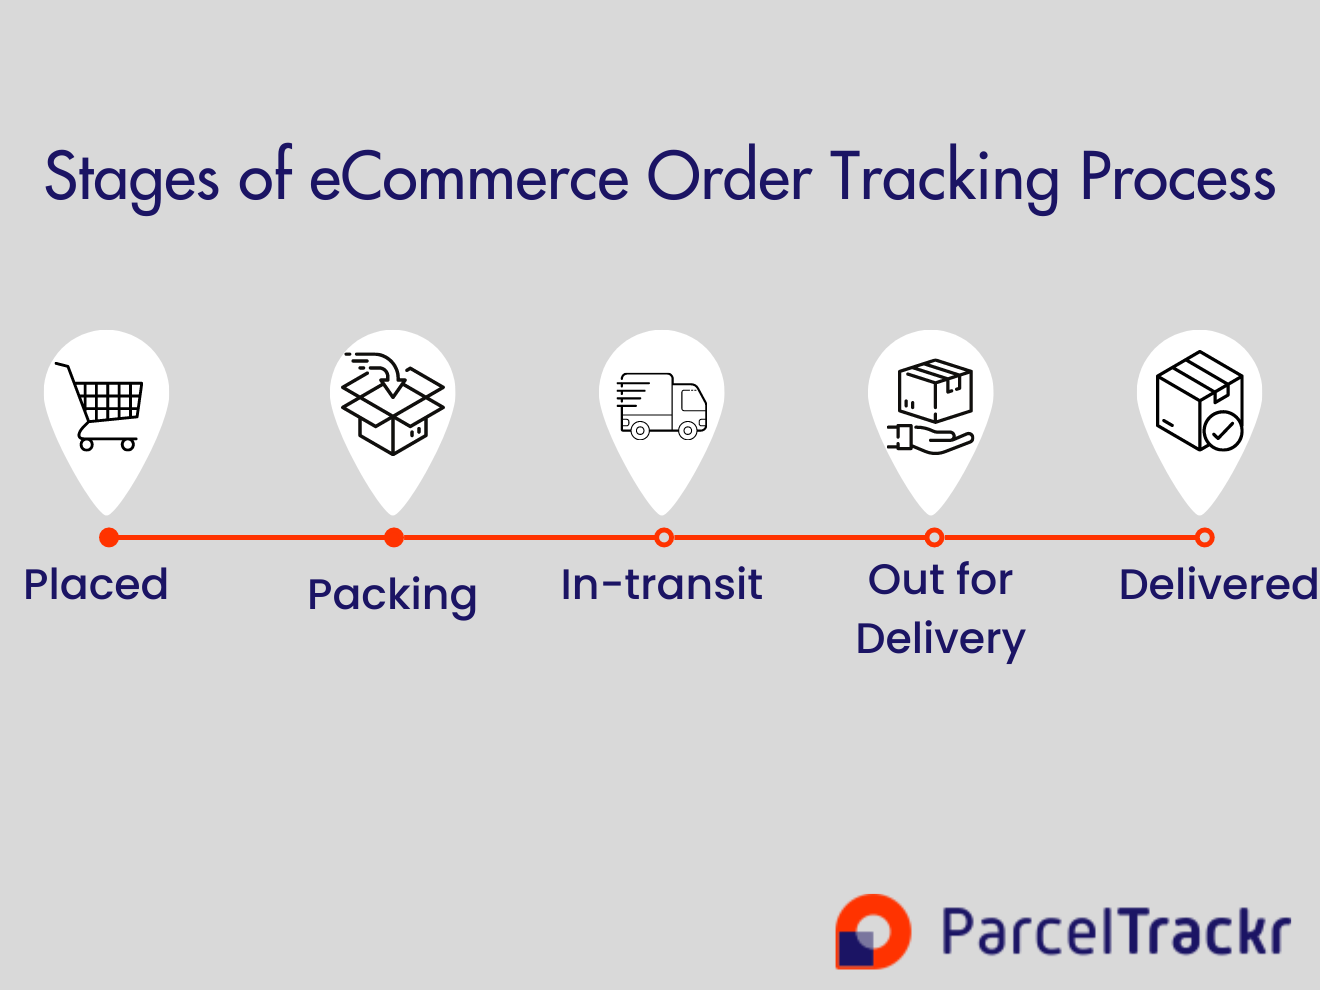 Stages of order tracking process